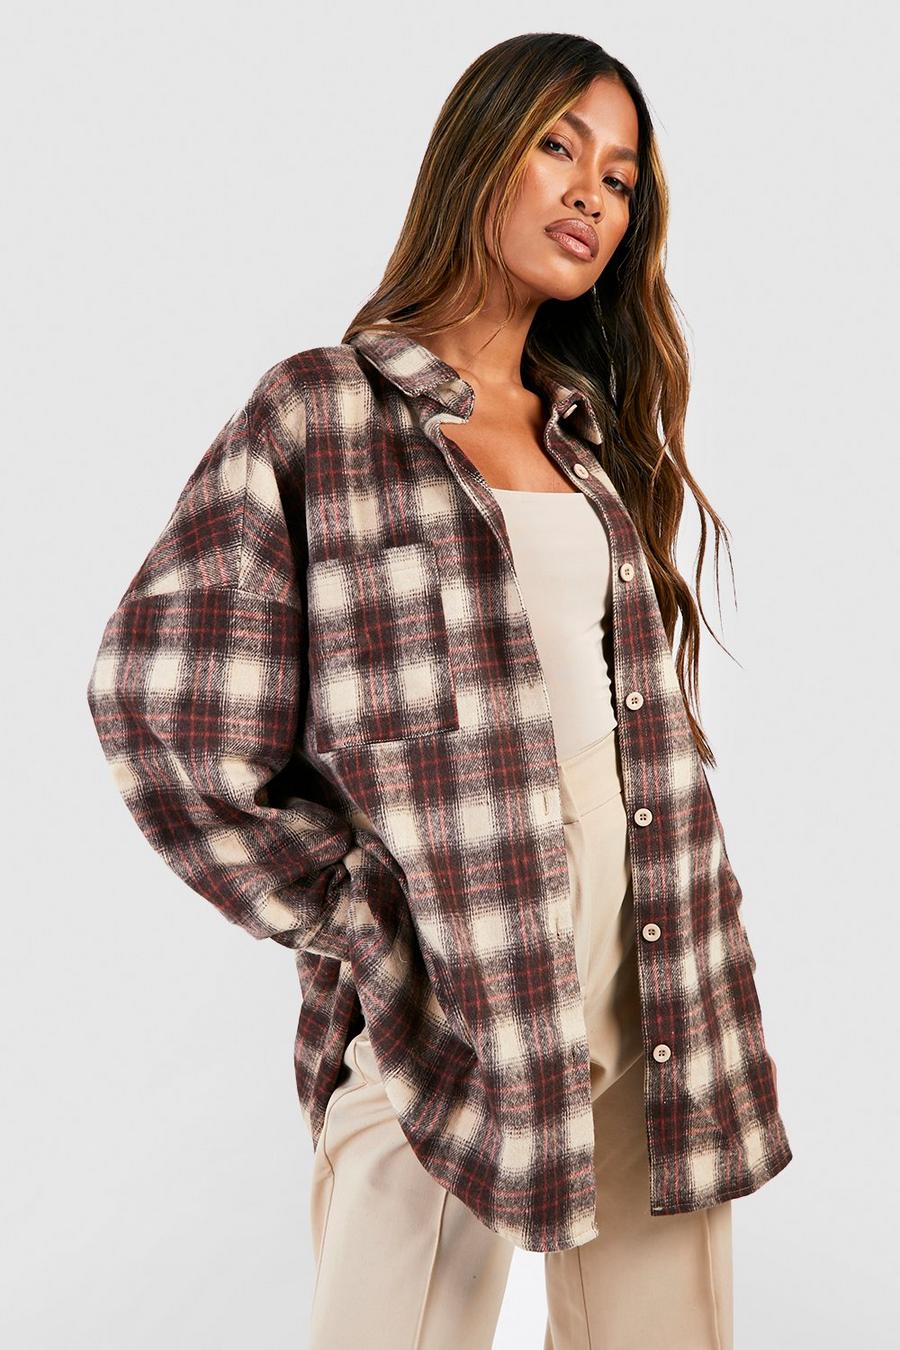 Stone beis Oversized Checked Shirt